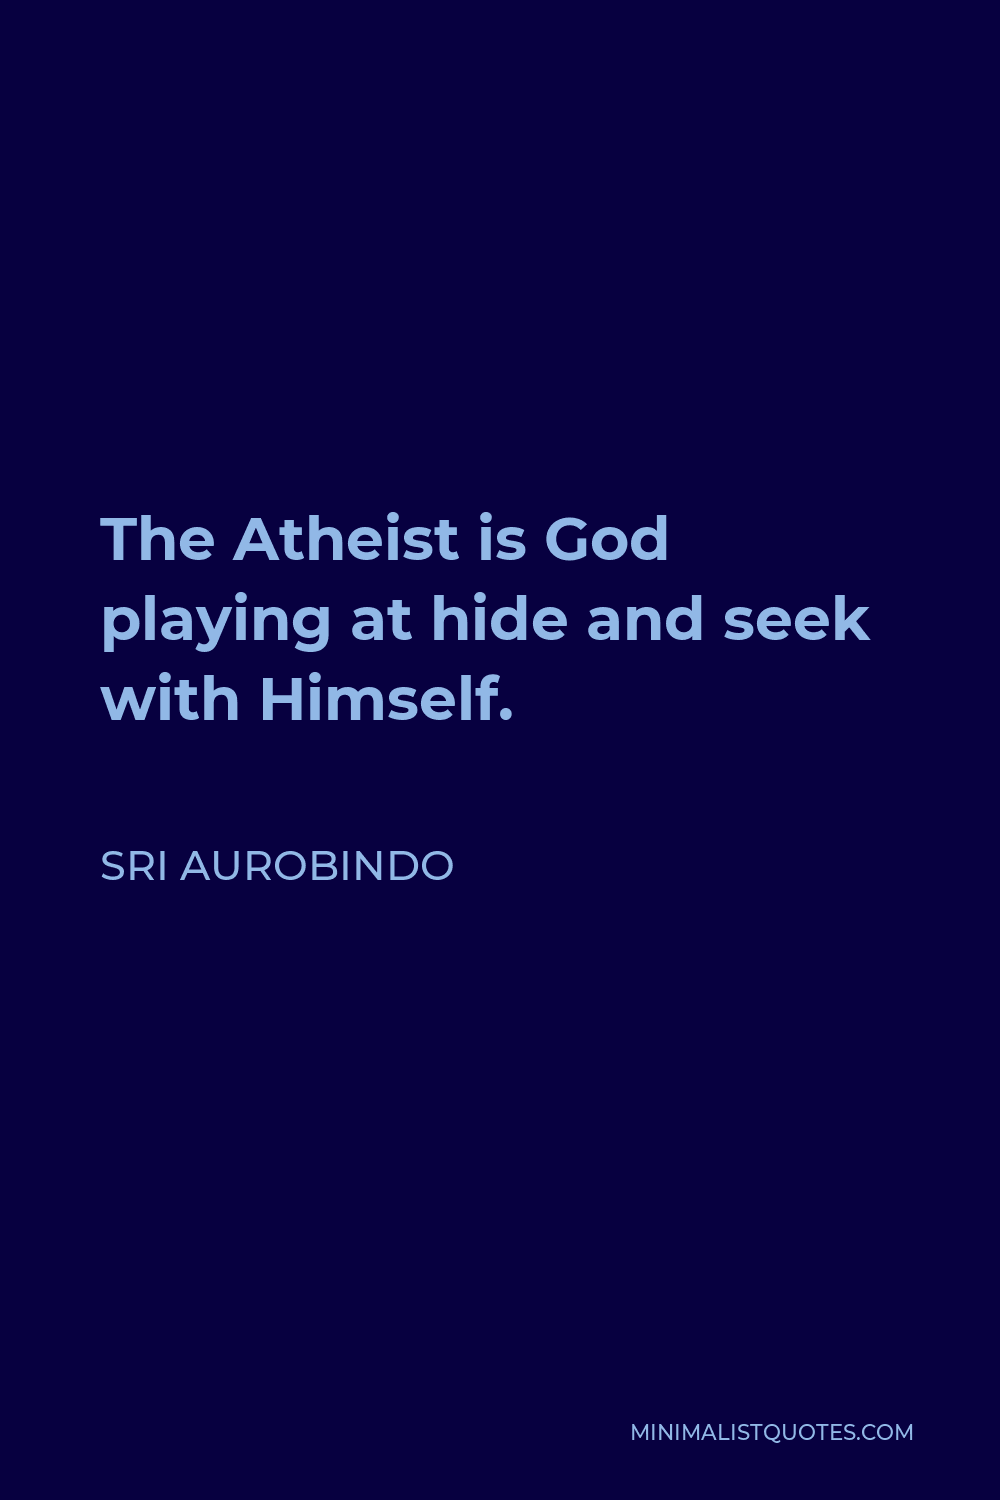 Sri Aurobindo Quote - The Atheist is God playing at hide and seek with Himself; but is the Theist any other? Well, perhaps; for he has seen the shadow of God and clutched at it.